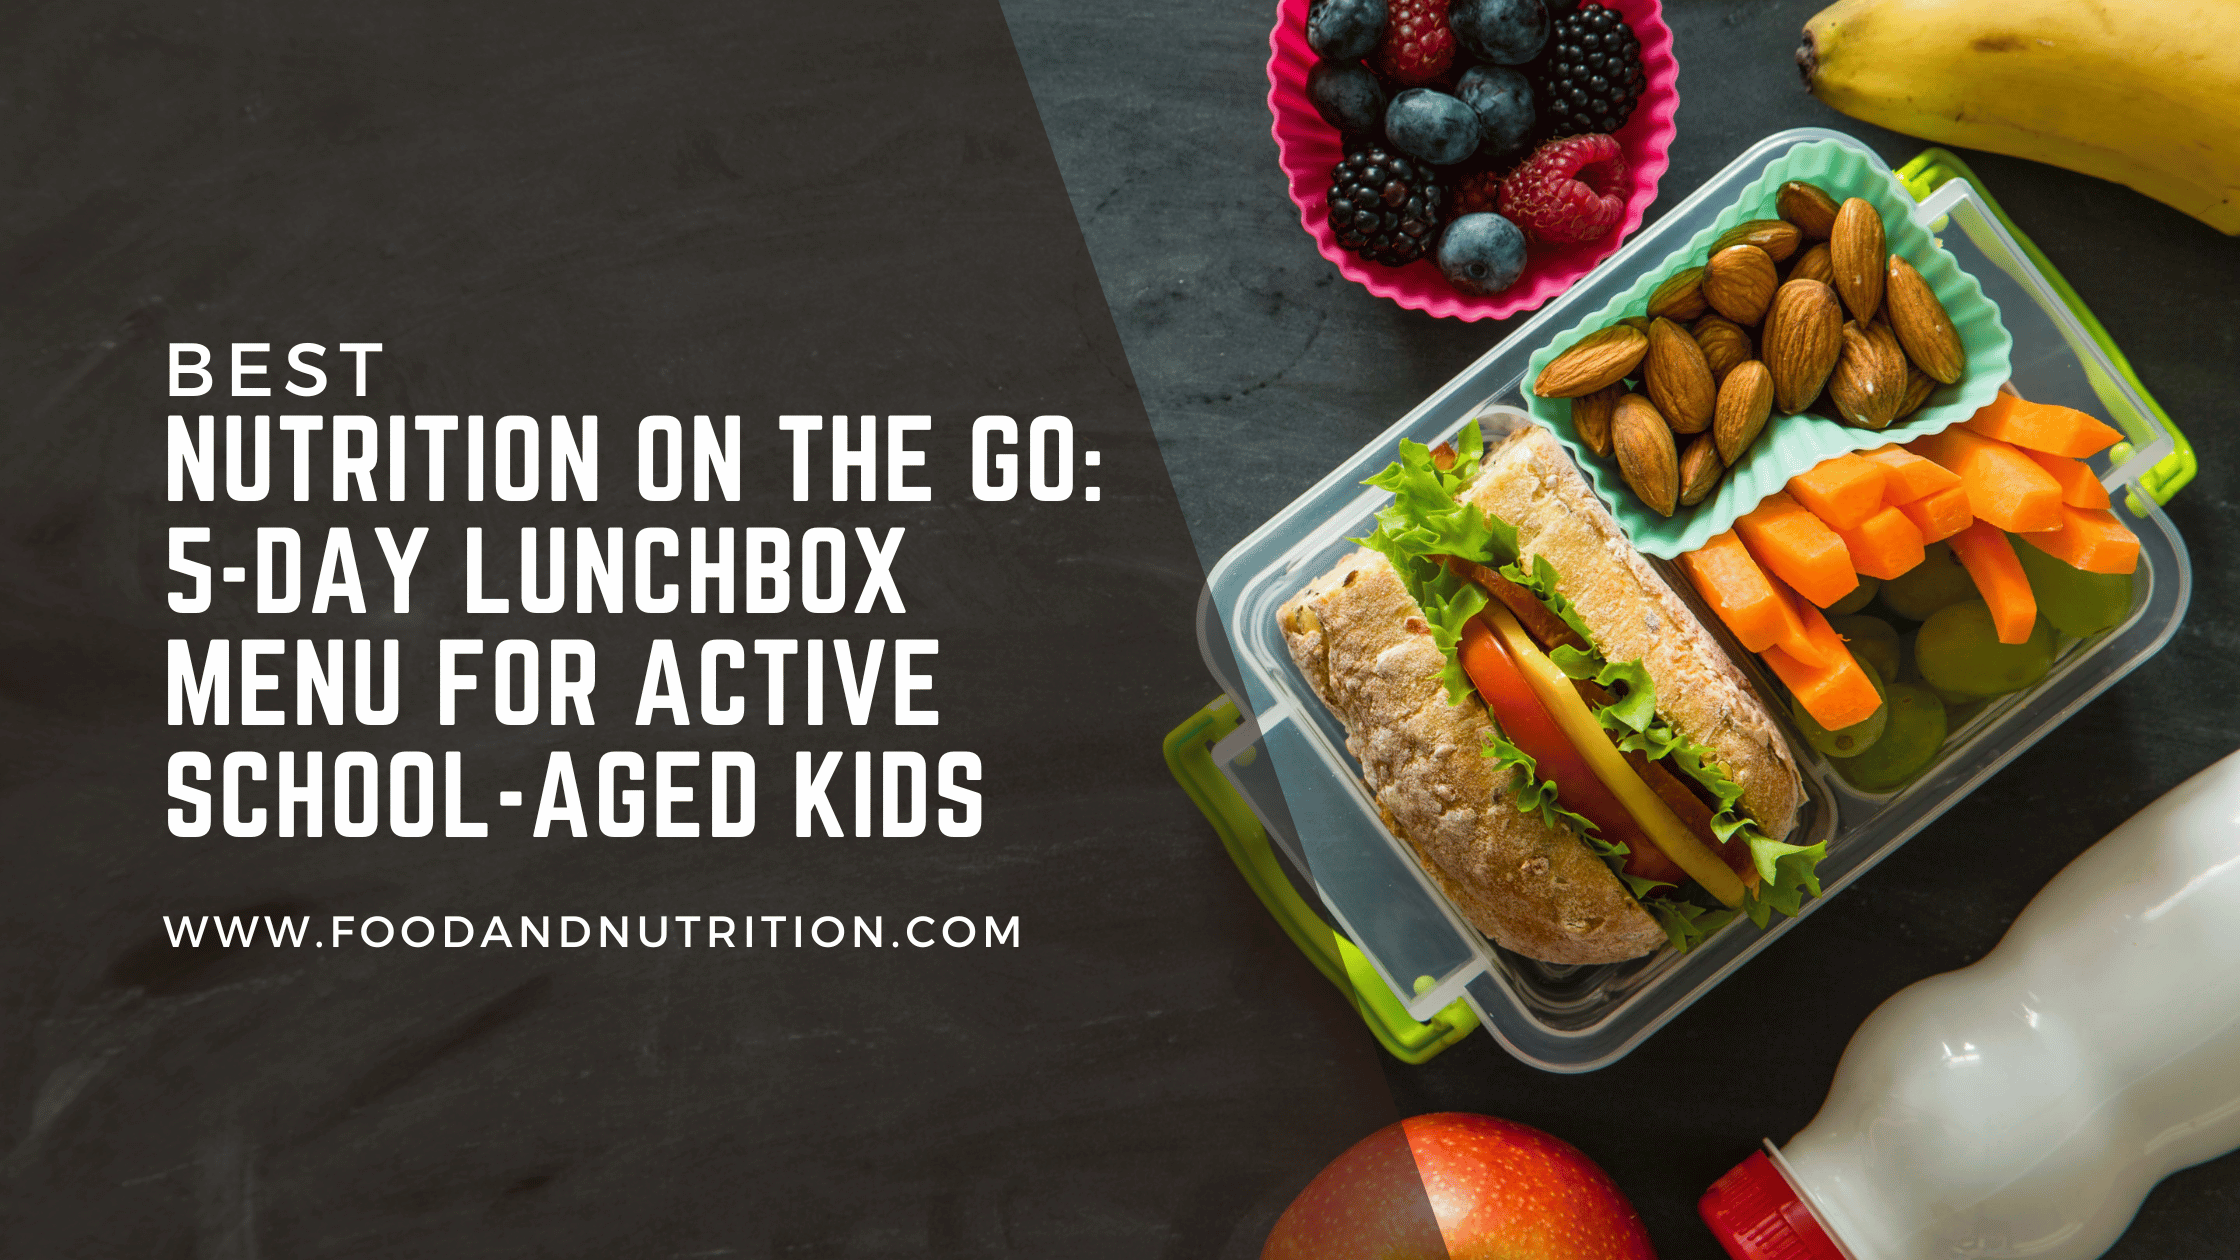 Nutrition on the Go: 5-Day Lunchbox Menu for Active School-Aged Kids